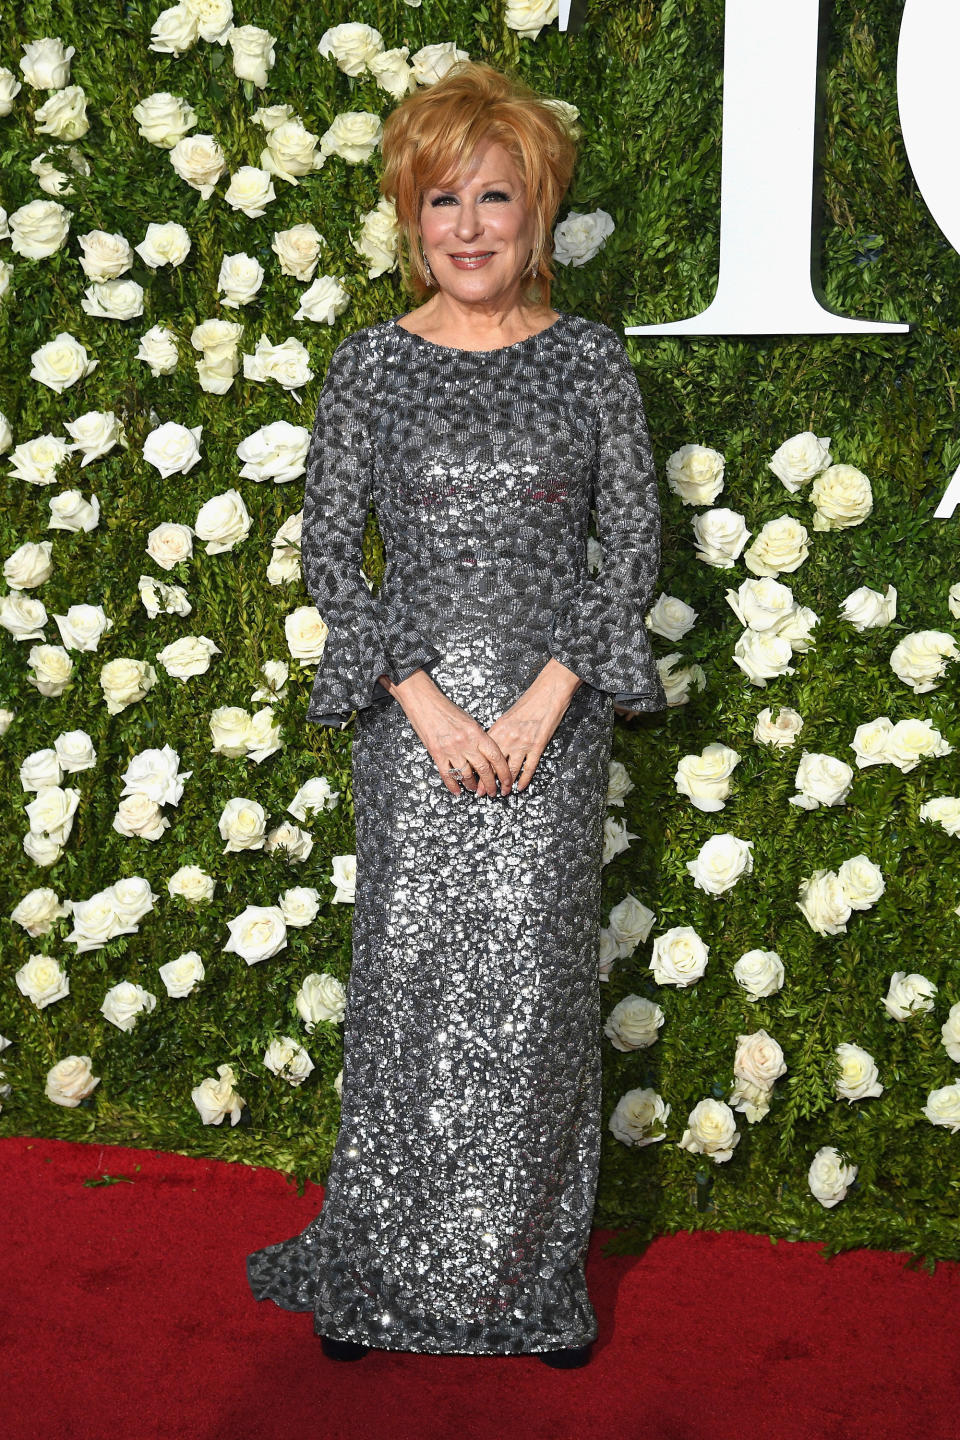 Bette Midler at the 2017 Tony Awards. (Photo: Dimitrios Kambouris via Getty Images)